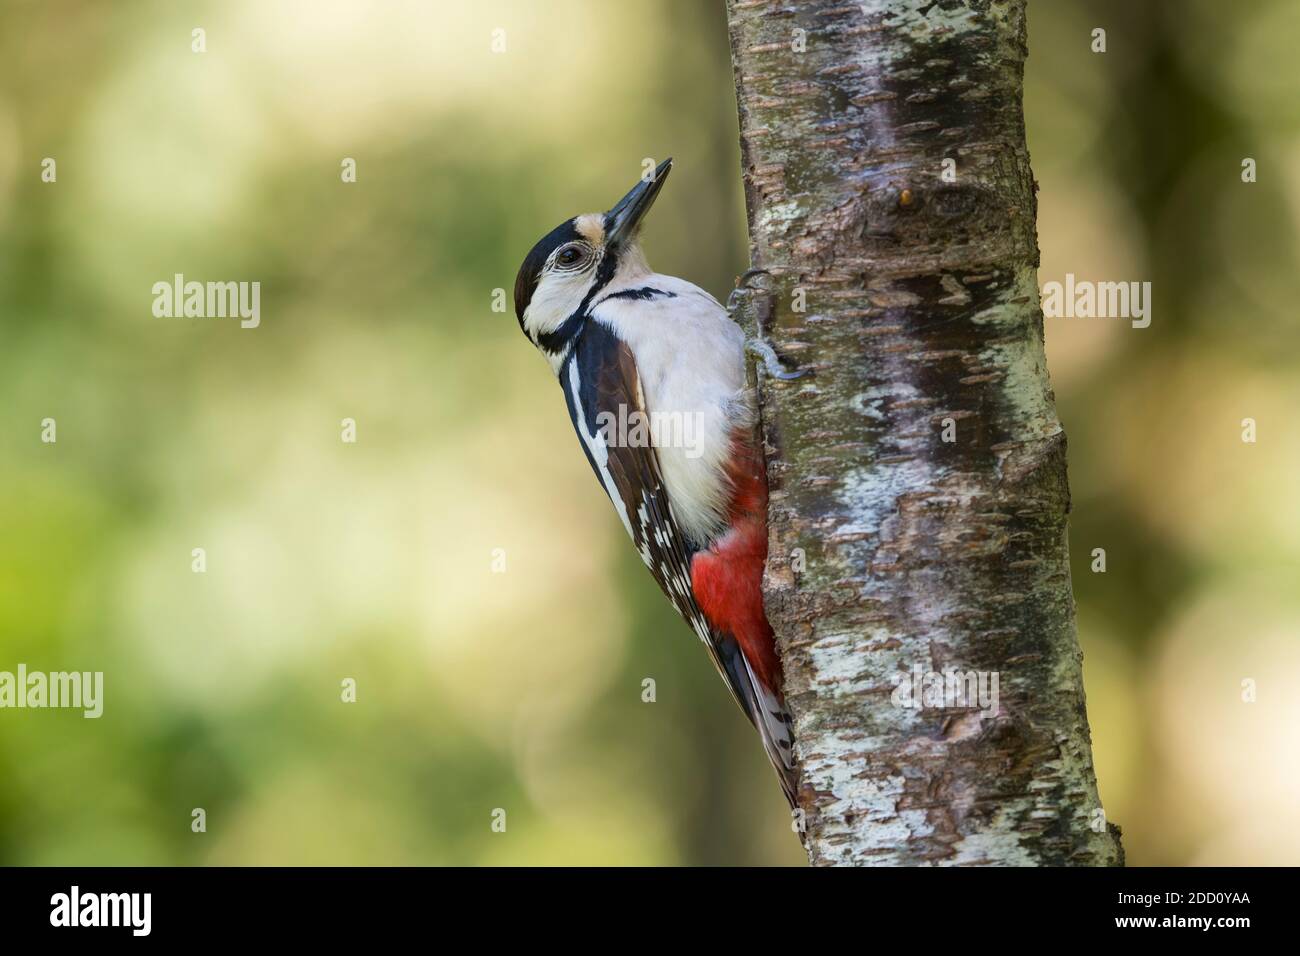 Female Great Spotted Woodpecker, Dendrocopos major, on a birch tree, Dumfries & Galloway, Scotland Stock Photo